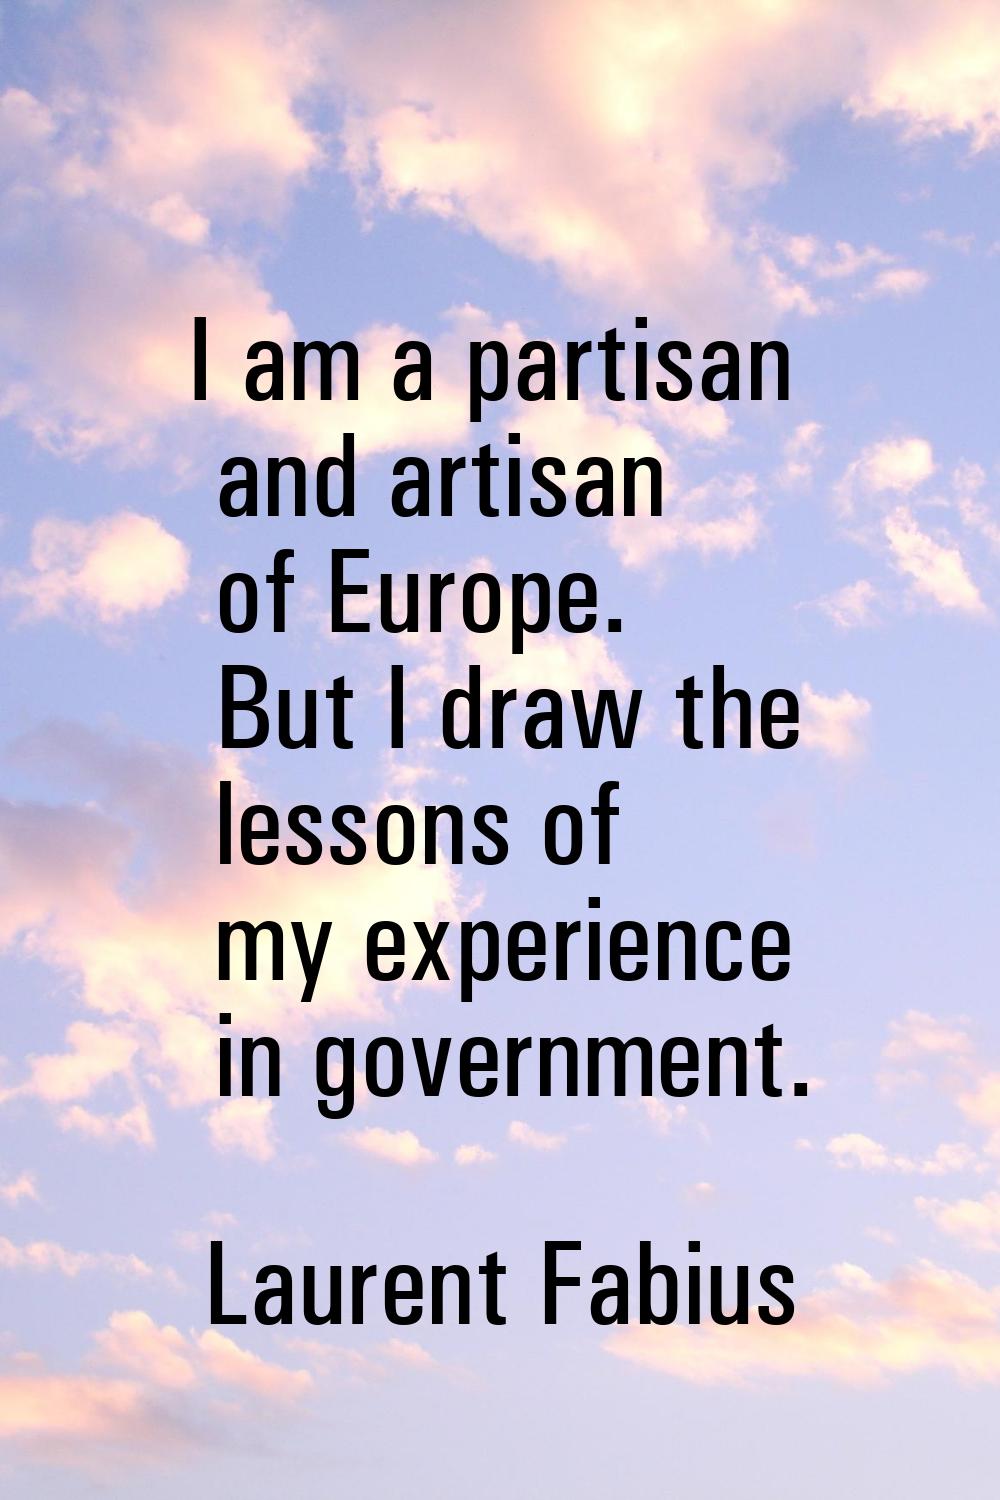 I am a partisan and artisan of Europe. But I draw the lessons of my experience in government.